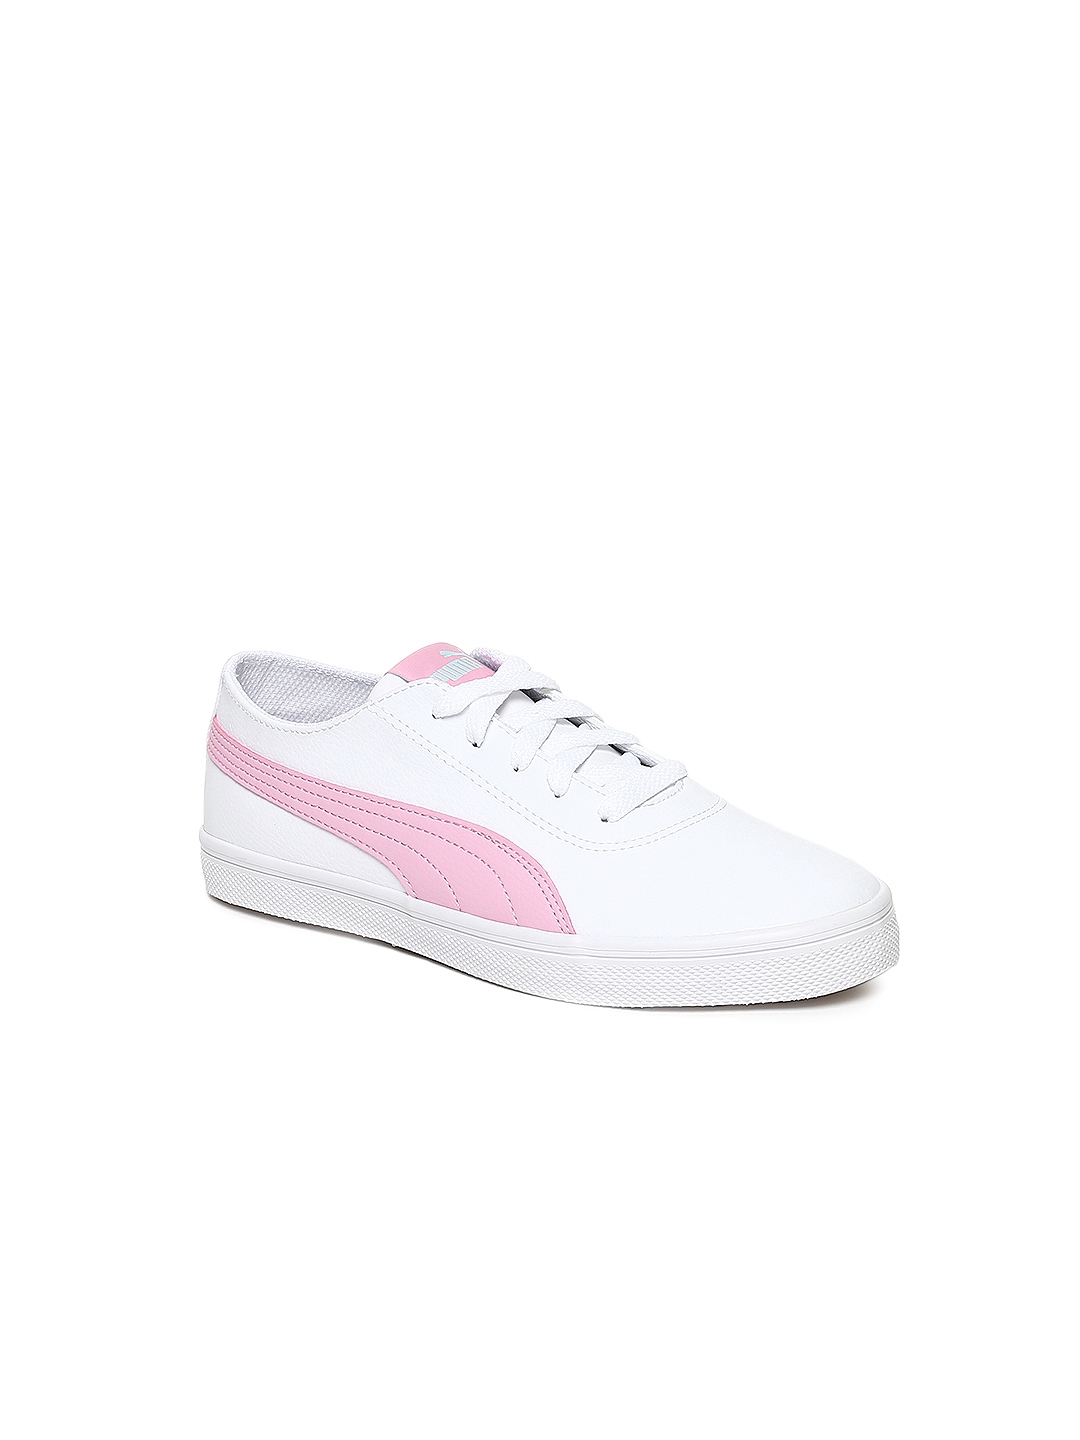 puma shoes for girls white